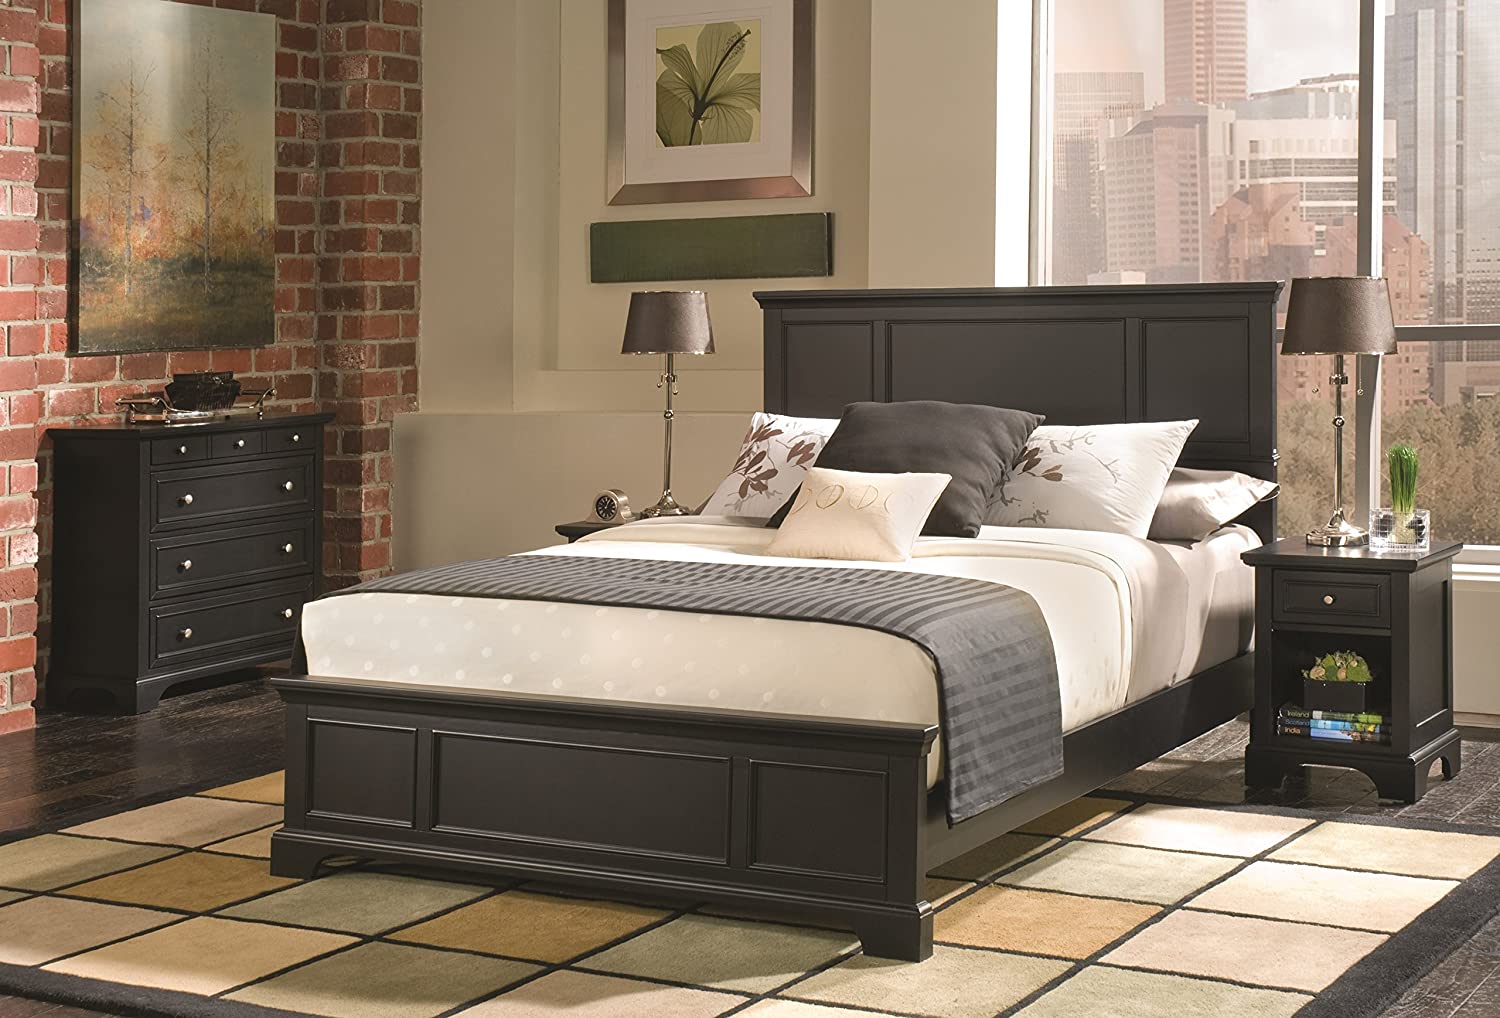 cheap bedroom furniture in dudley